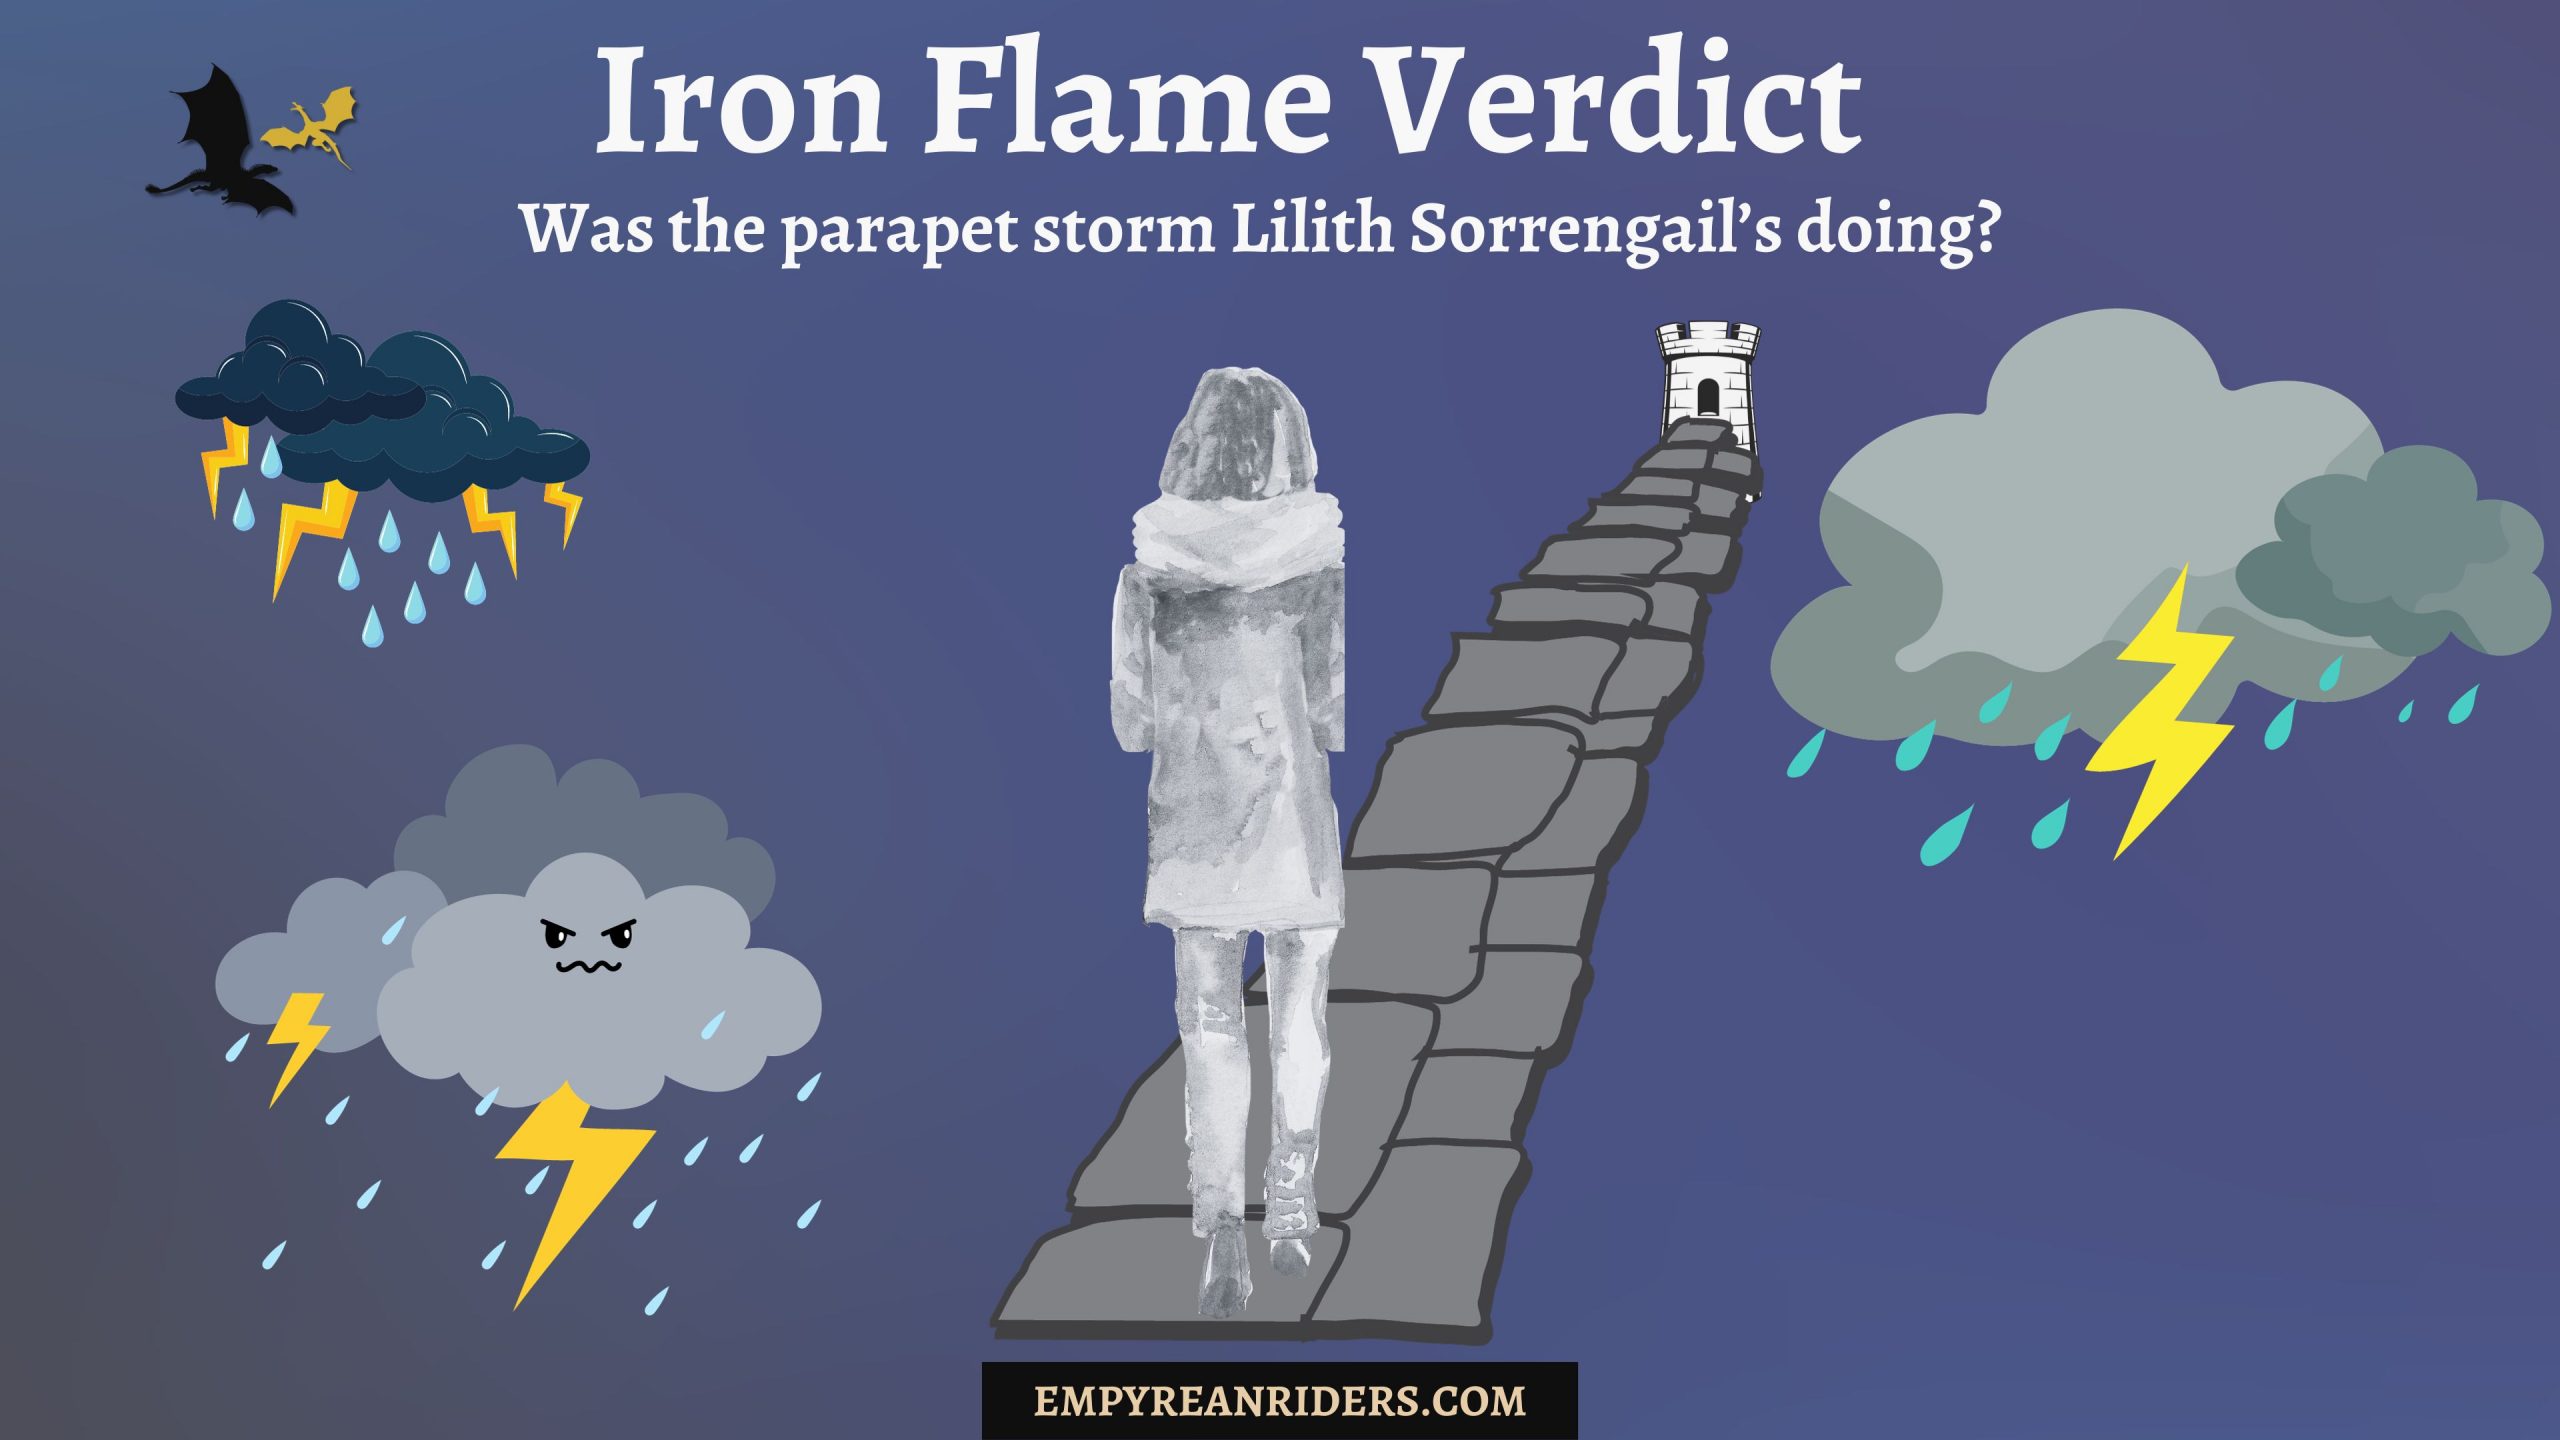 Was the storm on the parapet Lilith Sorrengail's doing? I have the answer